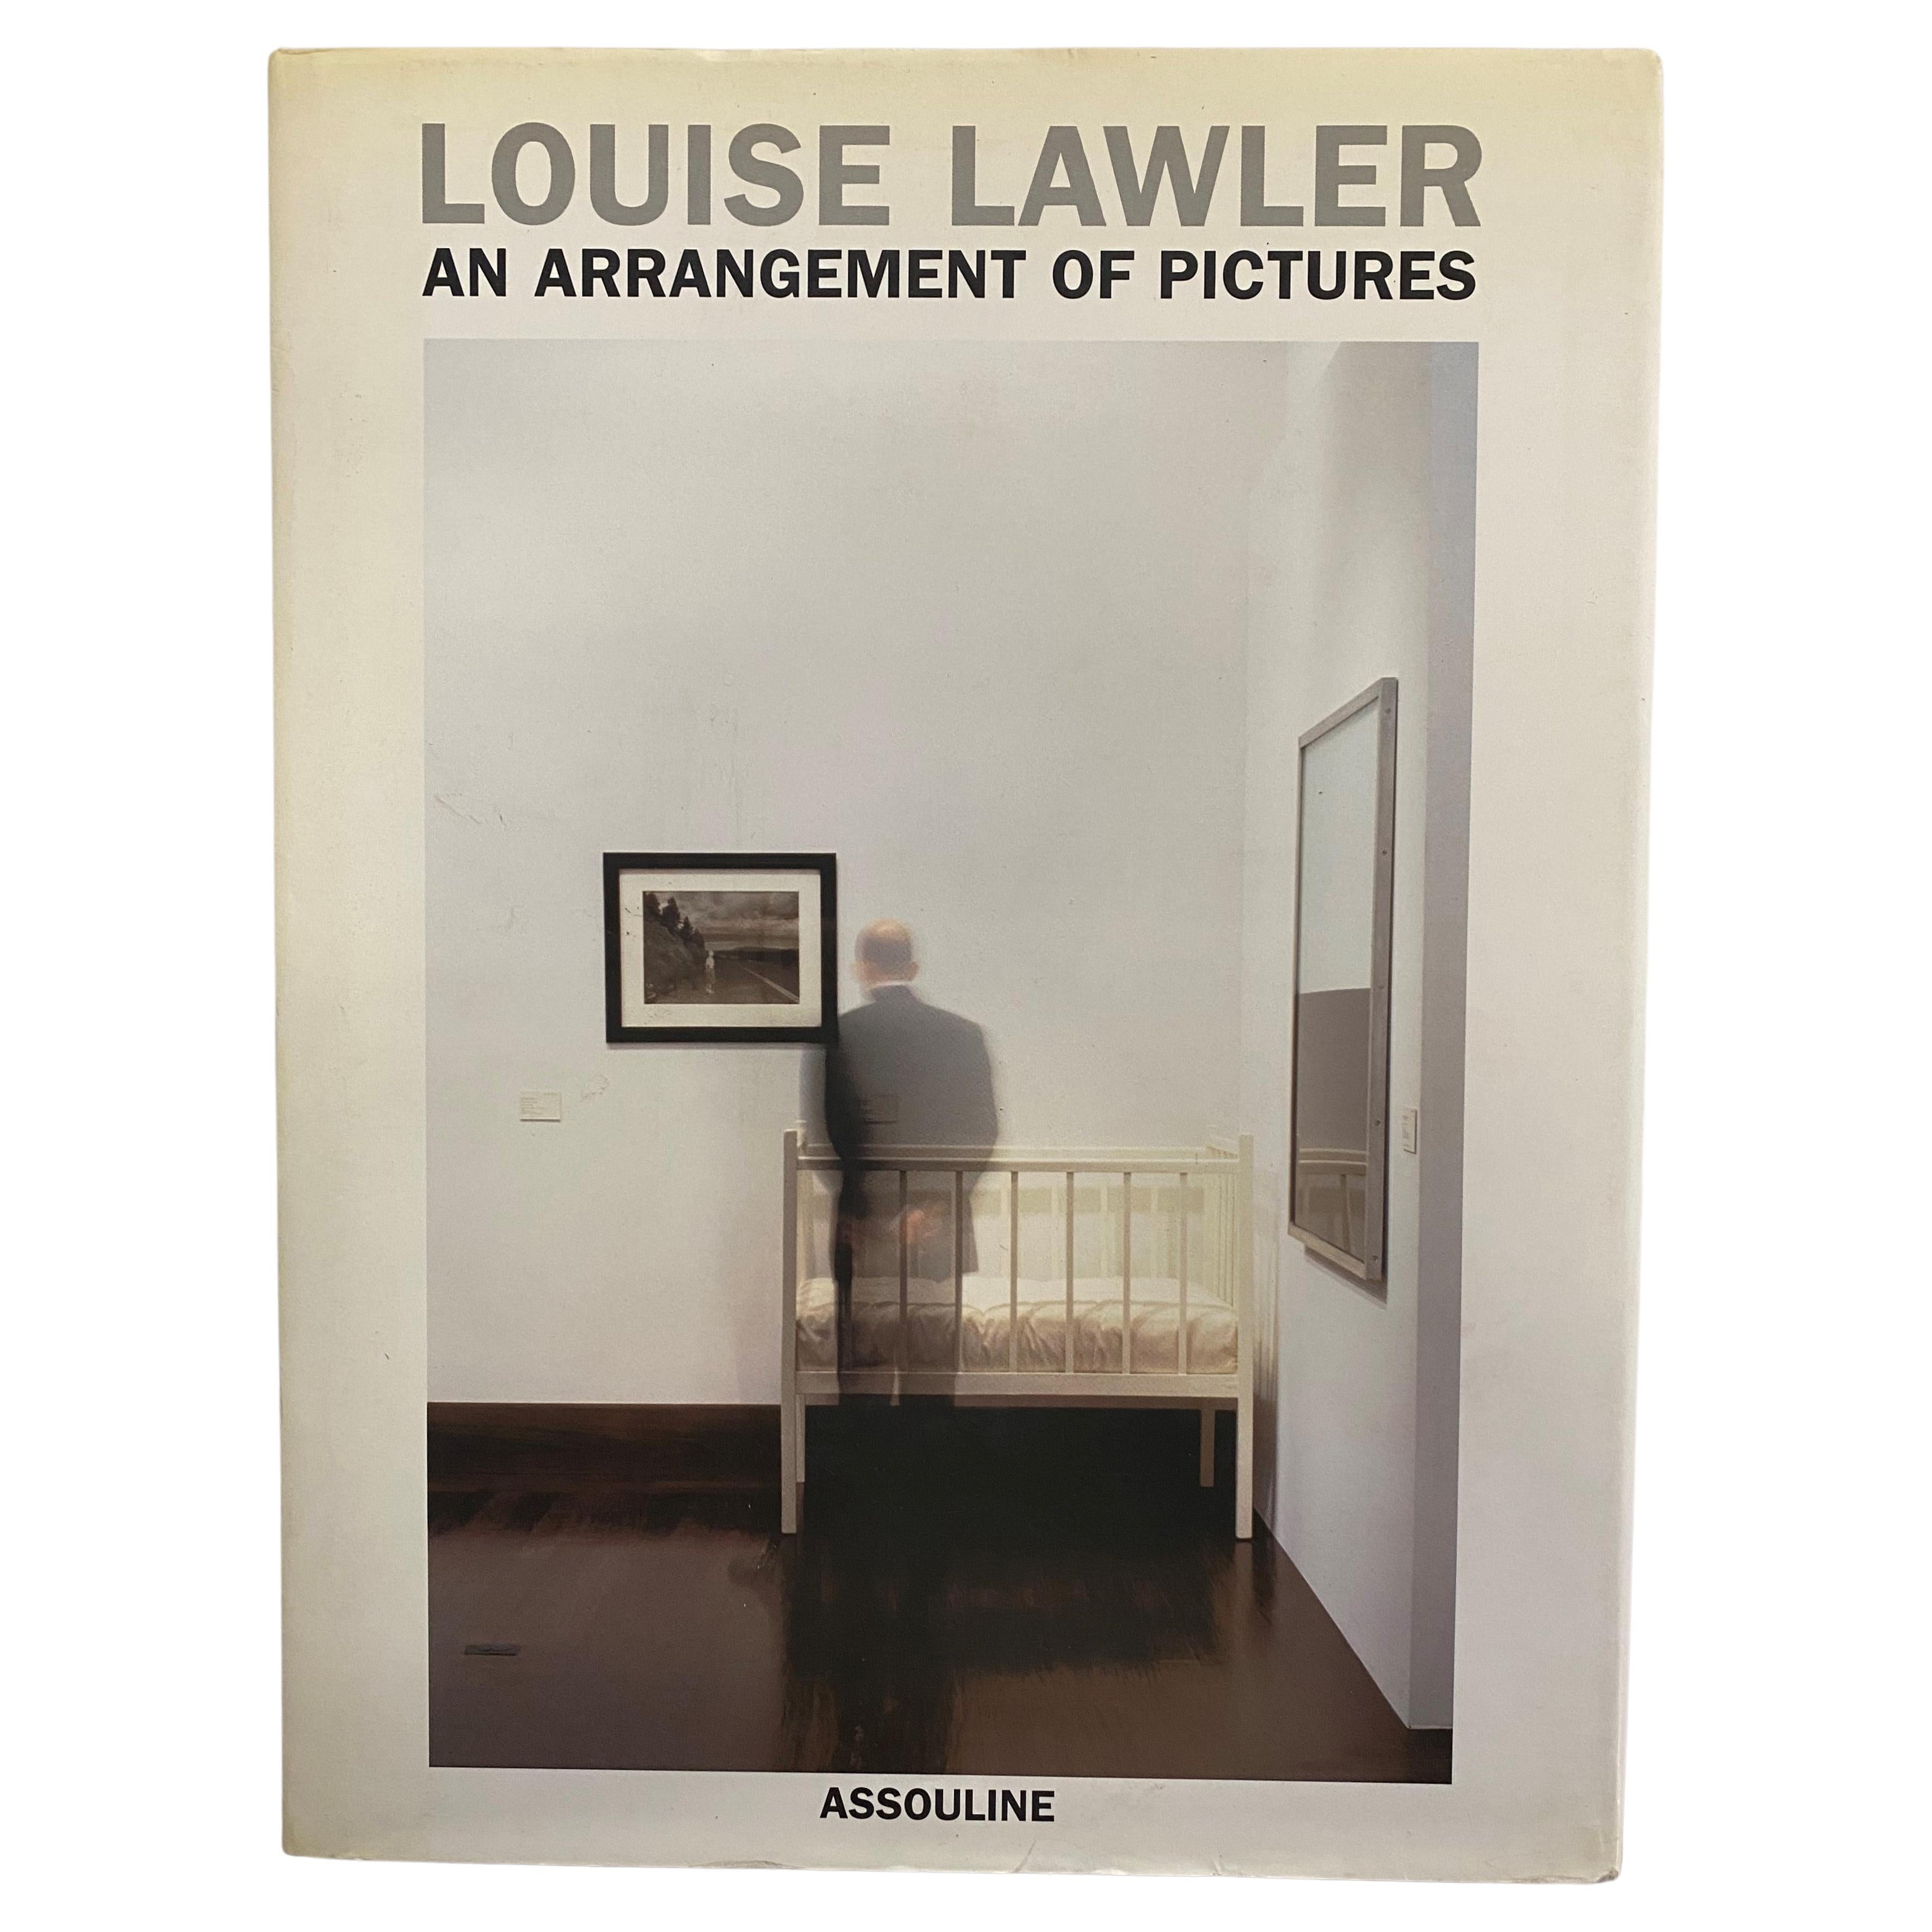 Louise Lawler: an Arrangement of Pictures by Johannes Meinhardt (Book)